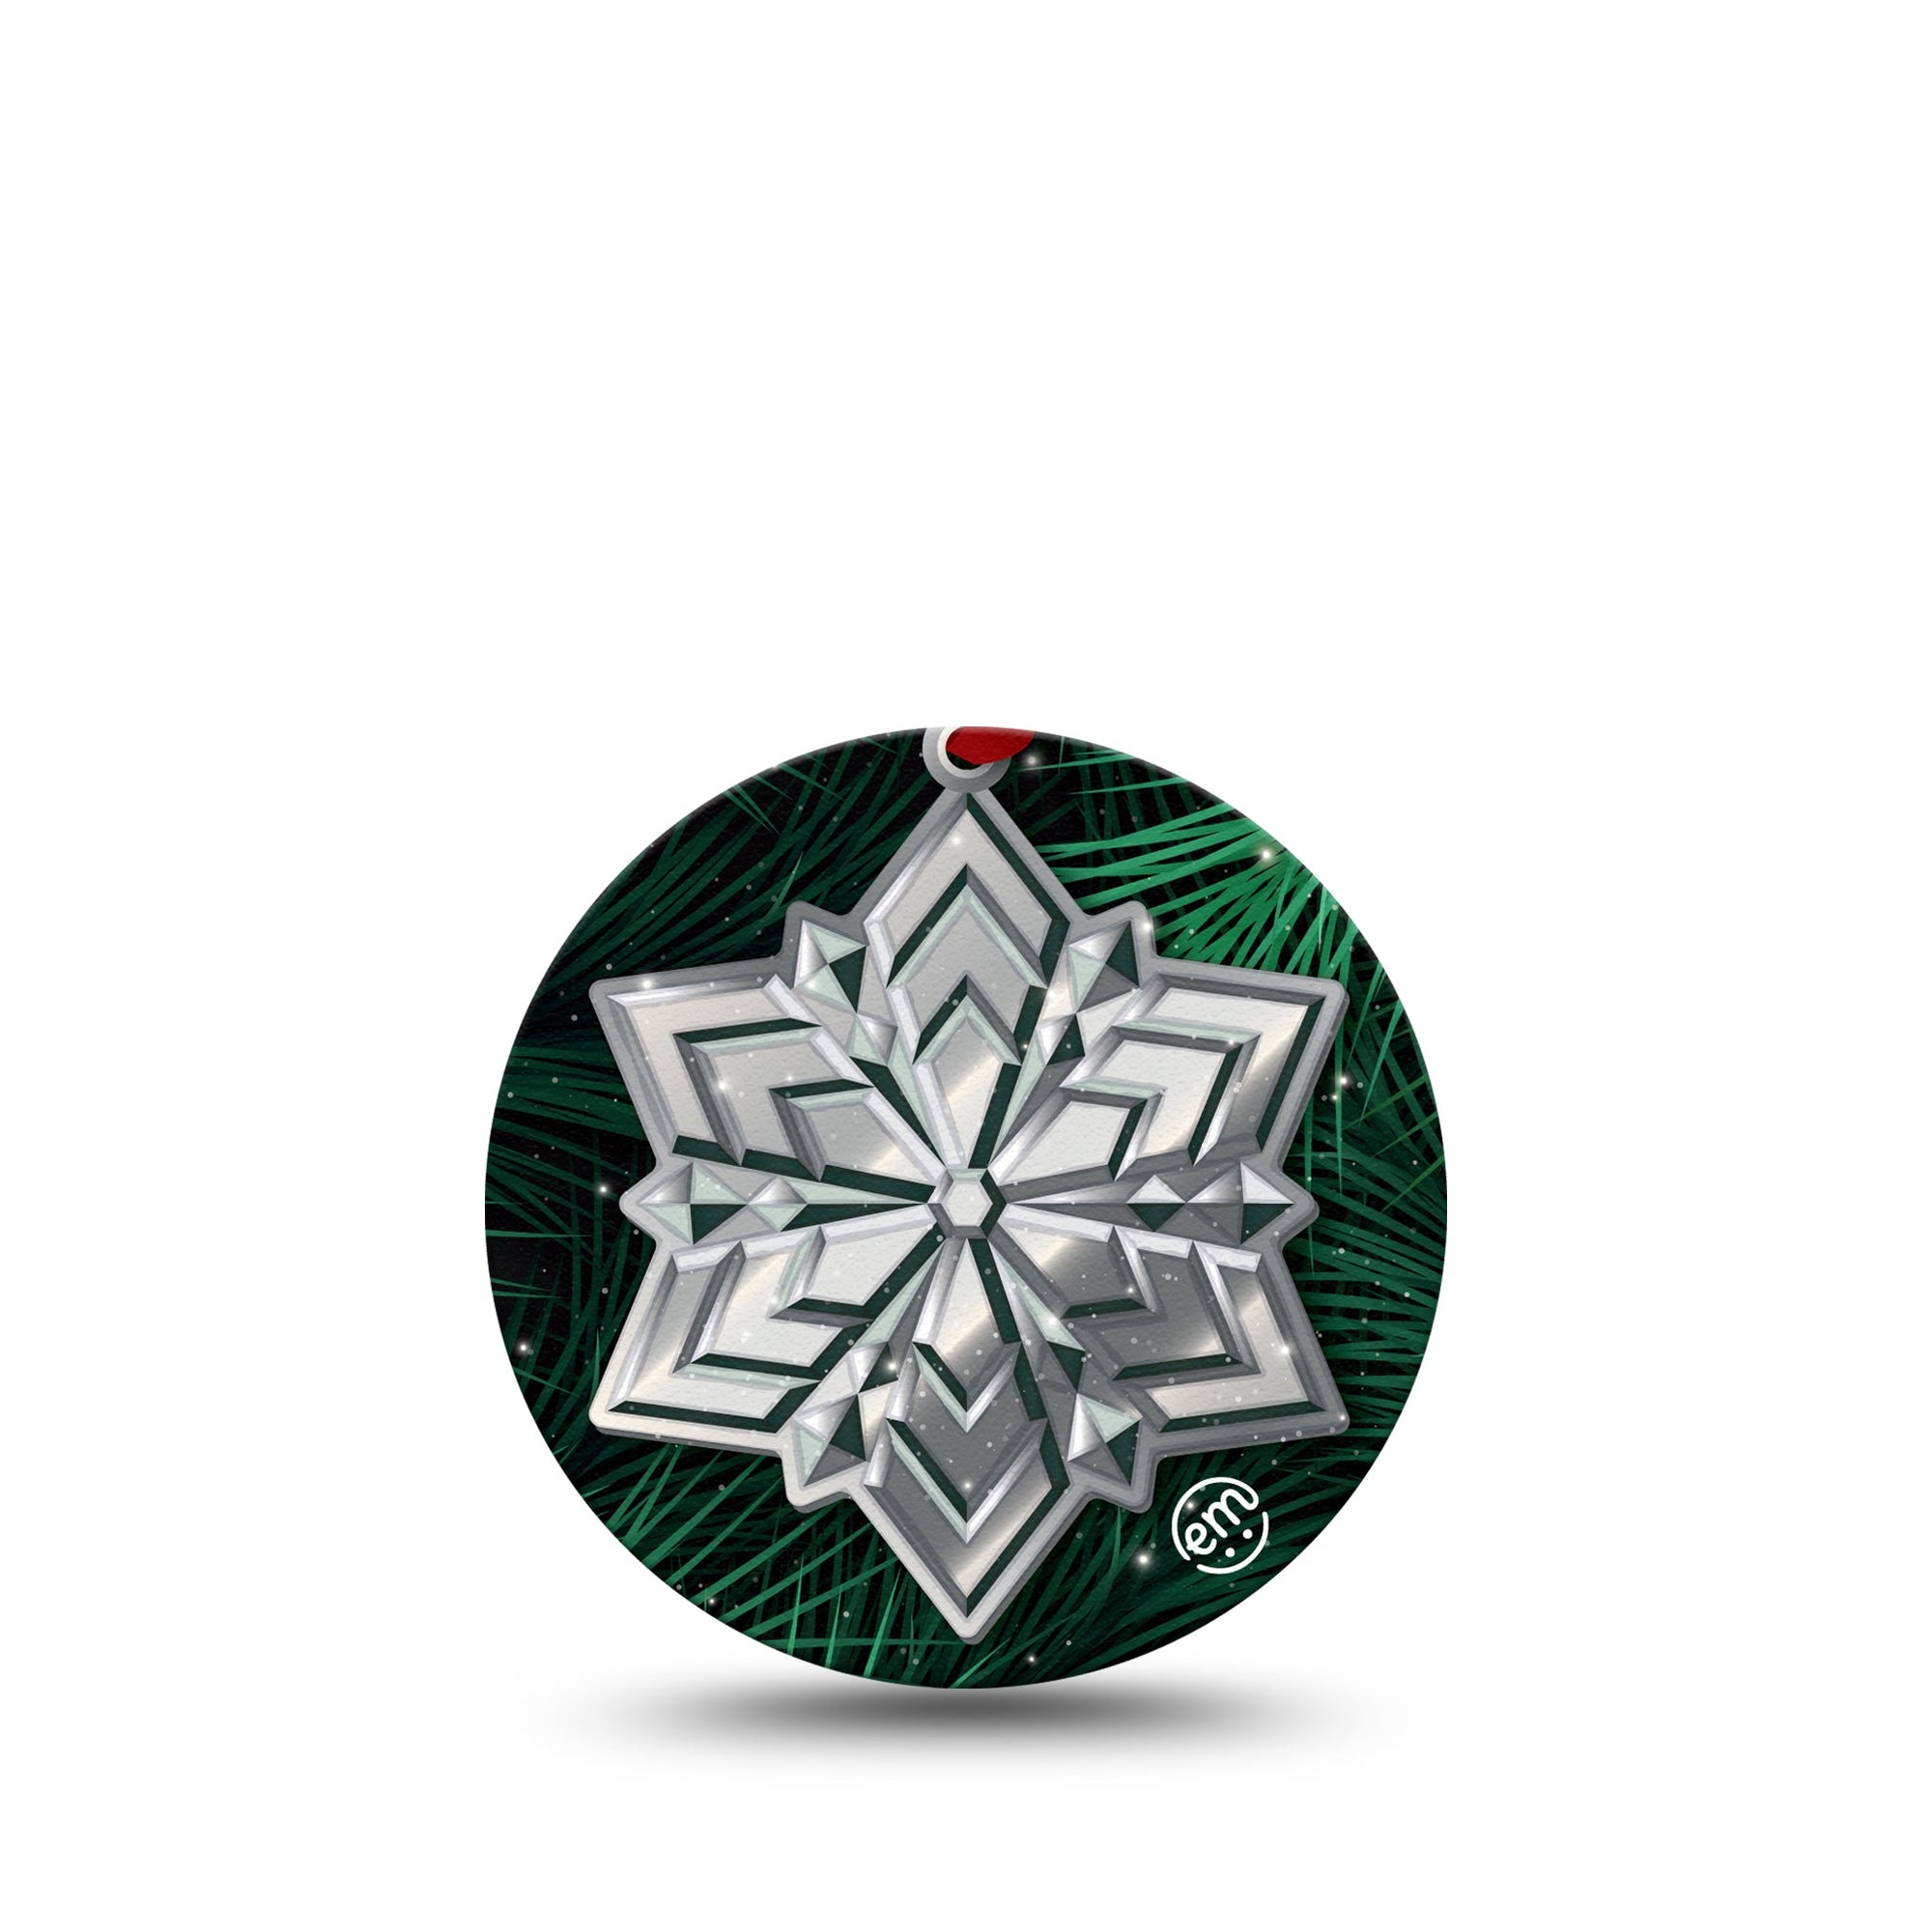 ExpressionMed Metallic Snowflake Libre 3 Overpatch Water Crystal Ornament, CGM Fixing Ring Design